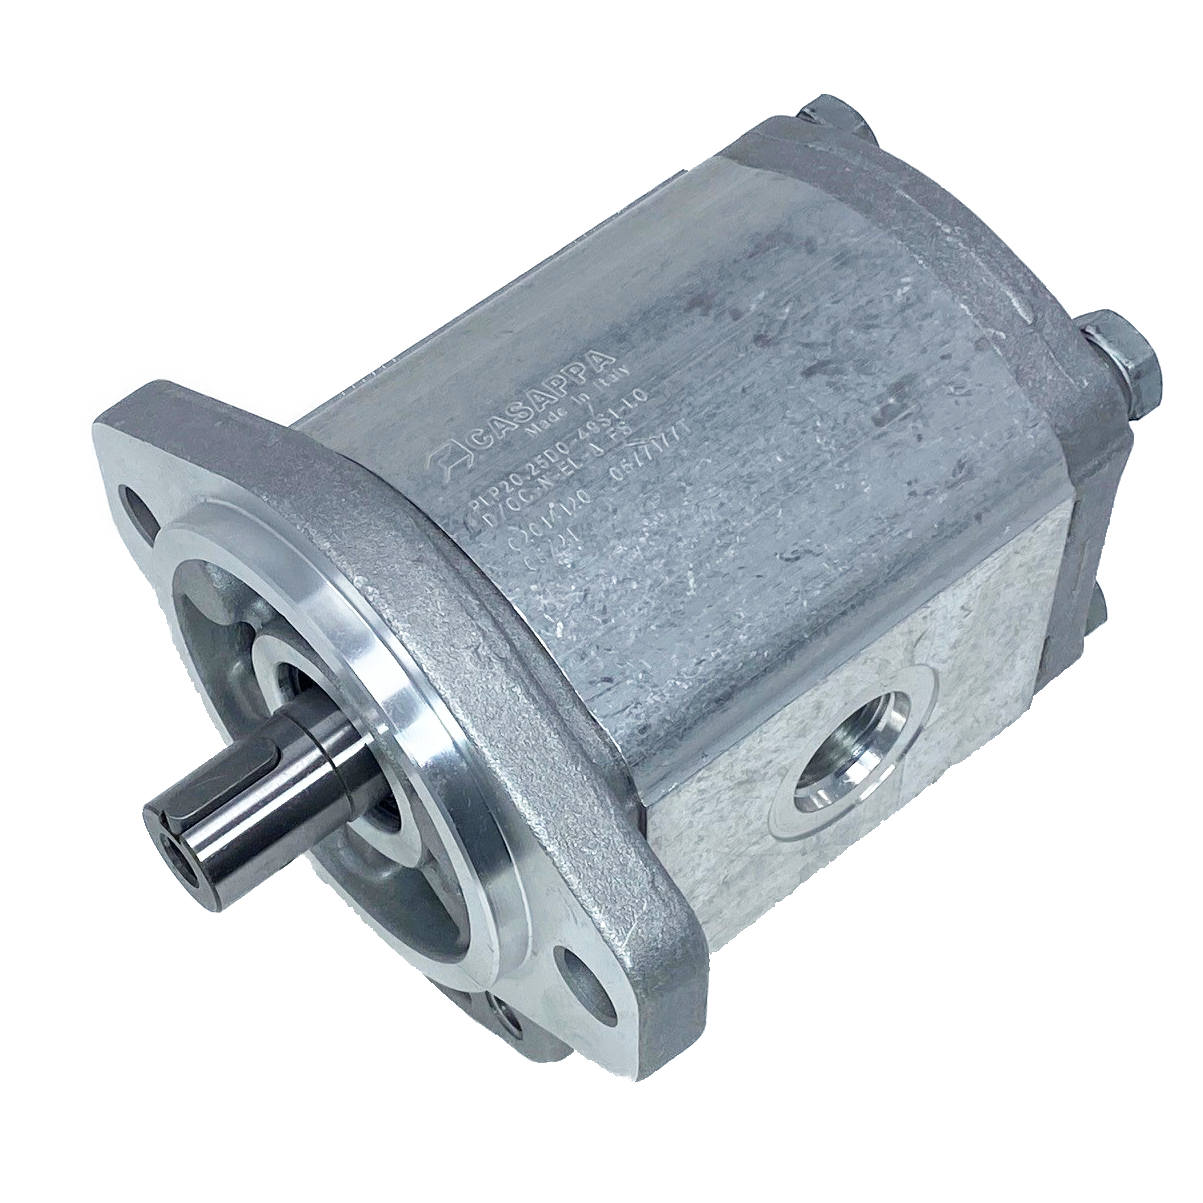 PHM20.25B0-50S9-LOC/OG-N-EL : Casappa Polaris Gear Motor, 26.42cc, 3335psi Rated, 3000RPM, Reversible Interior Drain, 3/4" Bore x 3/16" Key Shaft, SAE A 2-Bolt Flange, 0.625 (5/8") #10 SAE Inlet, 1.25" #20 SAE Outlet, Cast Iron Body, Aluminum Flange